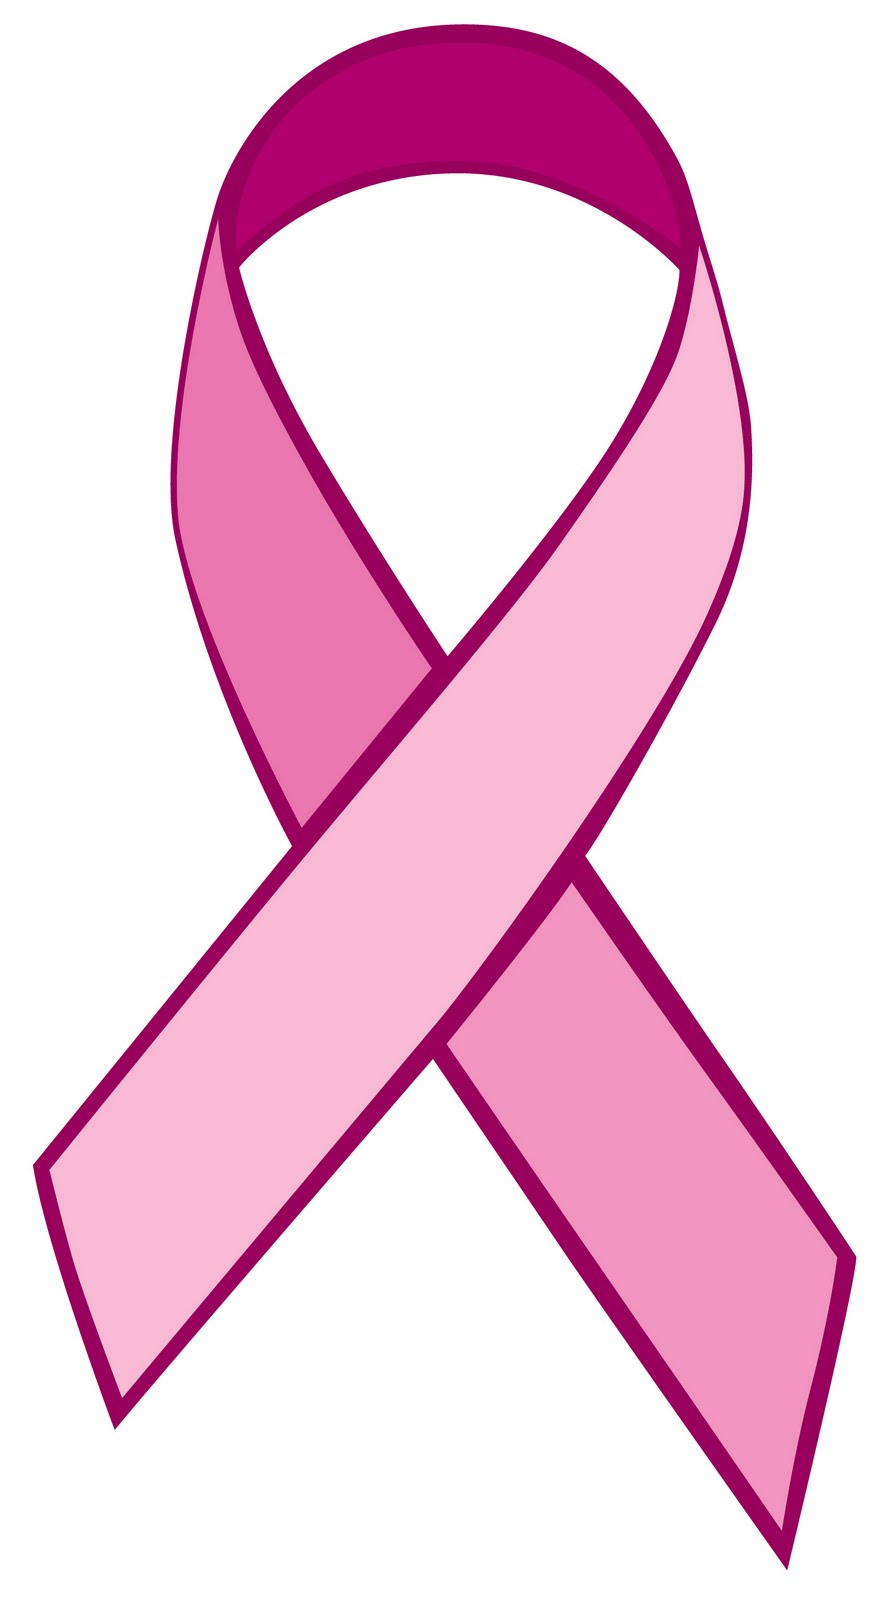 Free Awareness Ribbon Outline, Download Free Clip Art, Free.